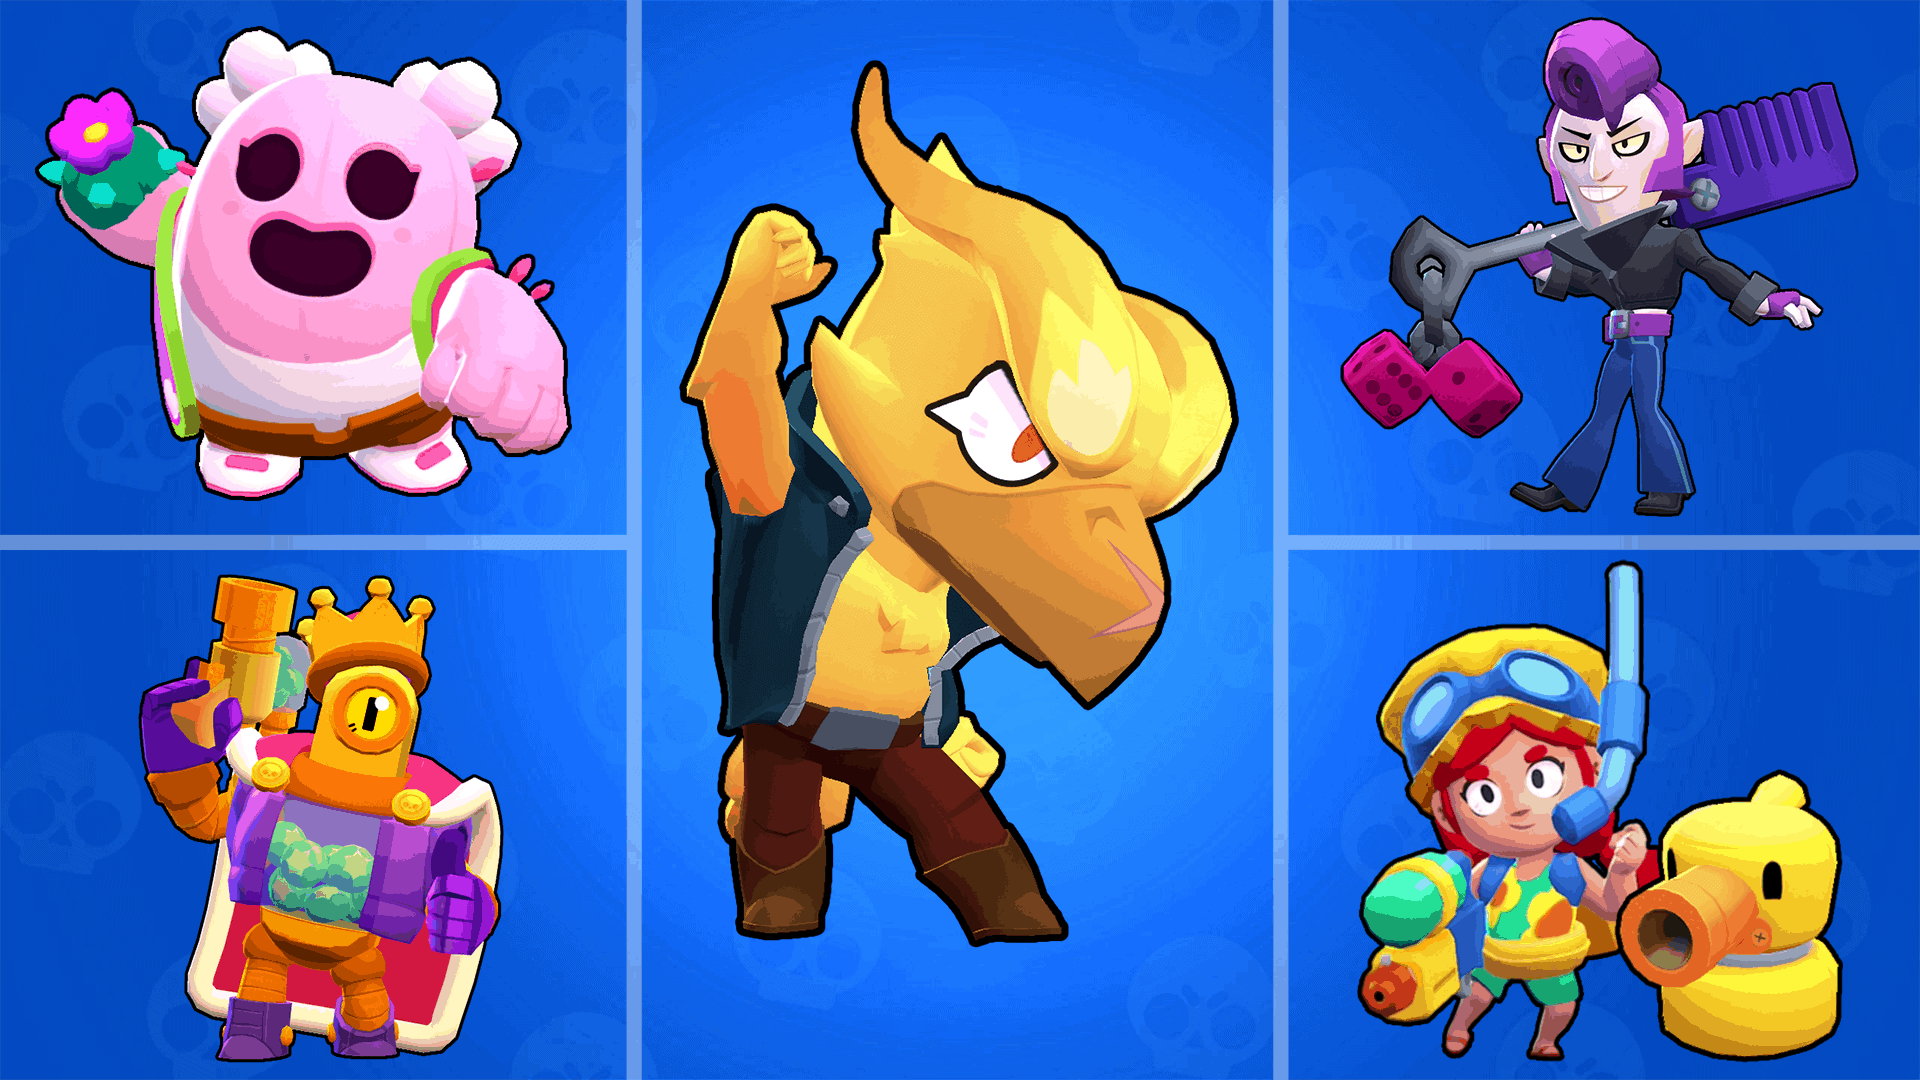 Read more about the article Brawl Stars – All Skins List